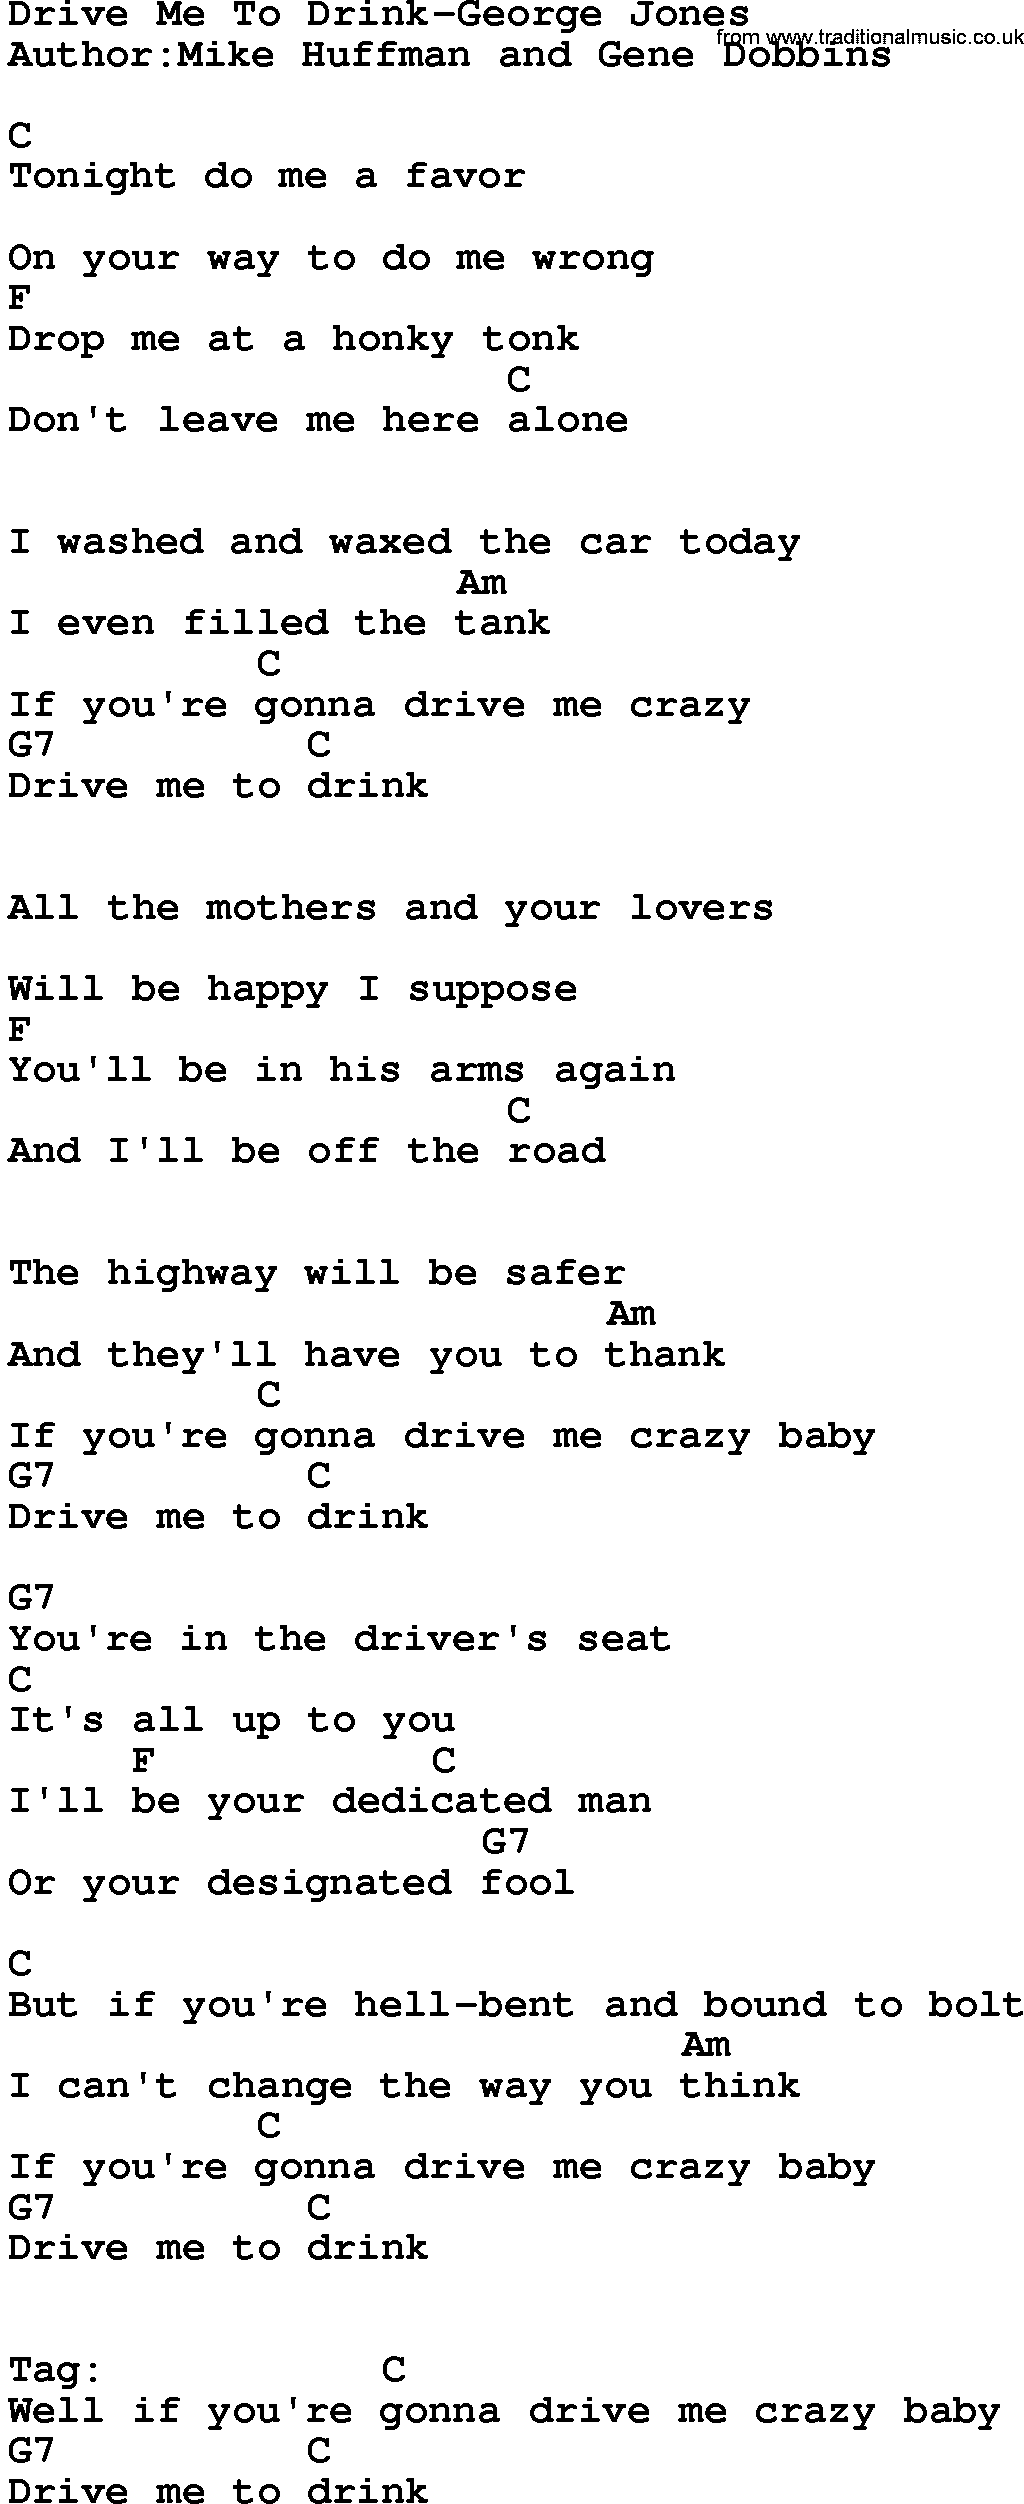 Country music song: Drive Me To Drink-George Jones lyrics and chords